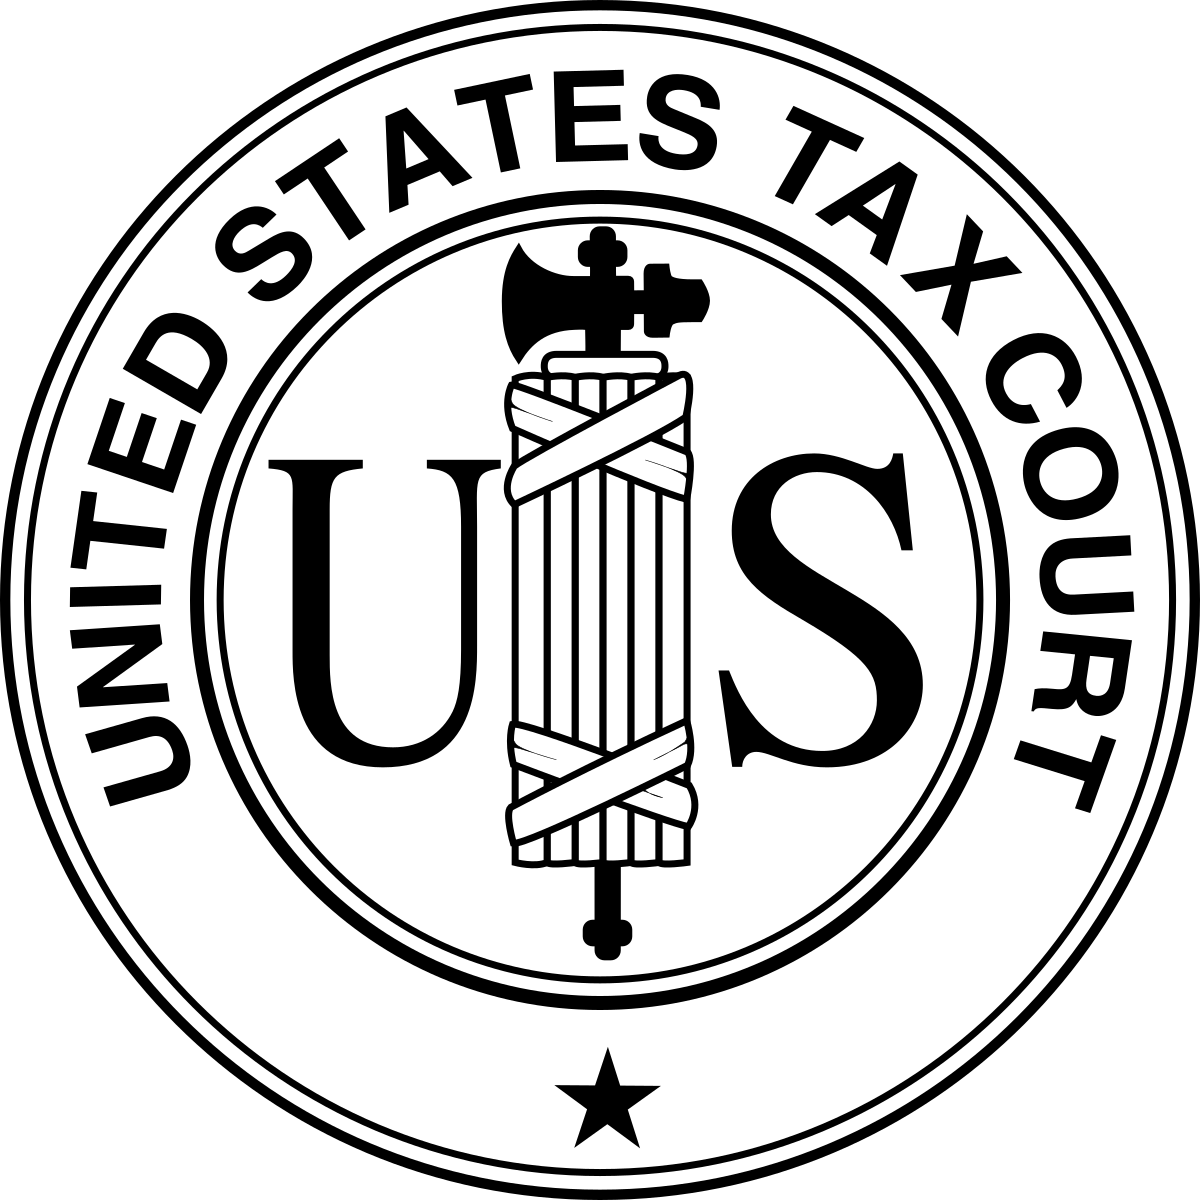 United states tax court. Jury clipart public trial